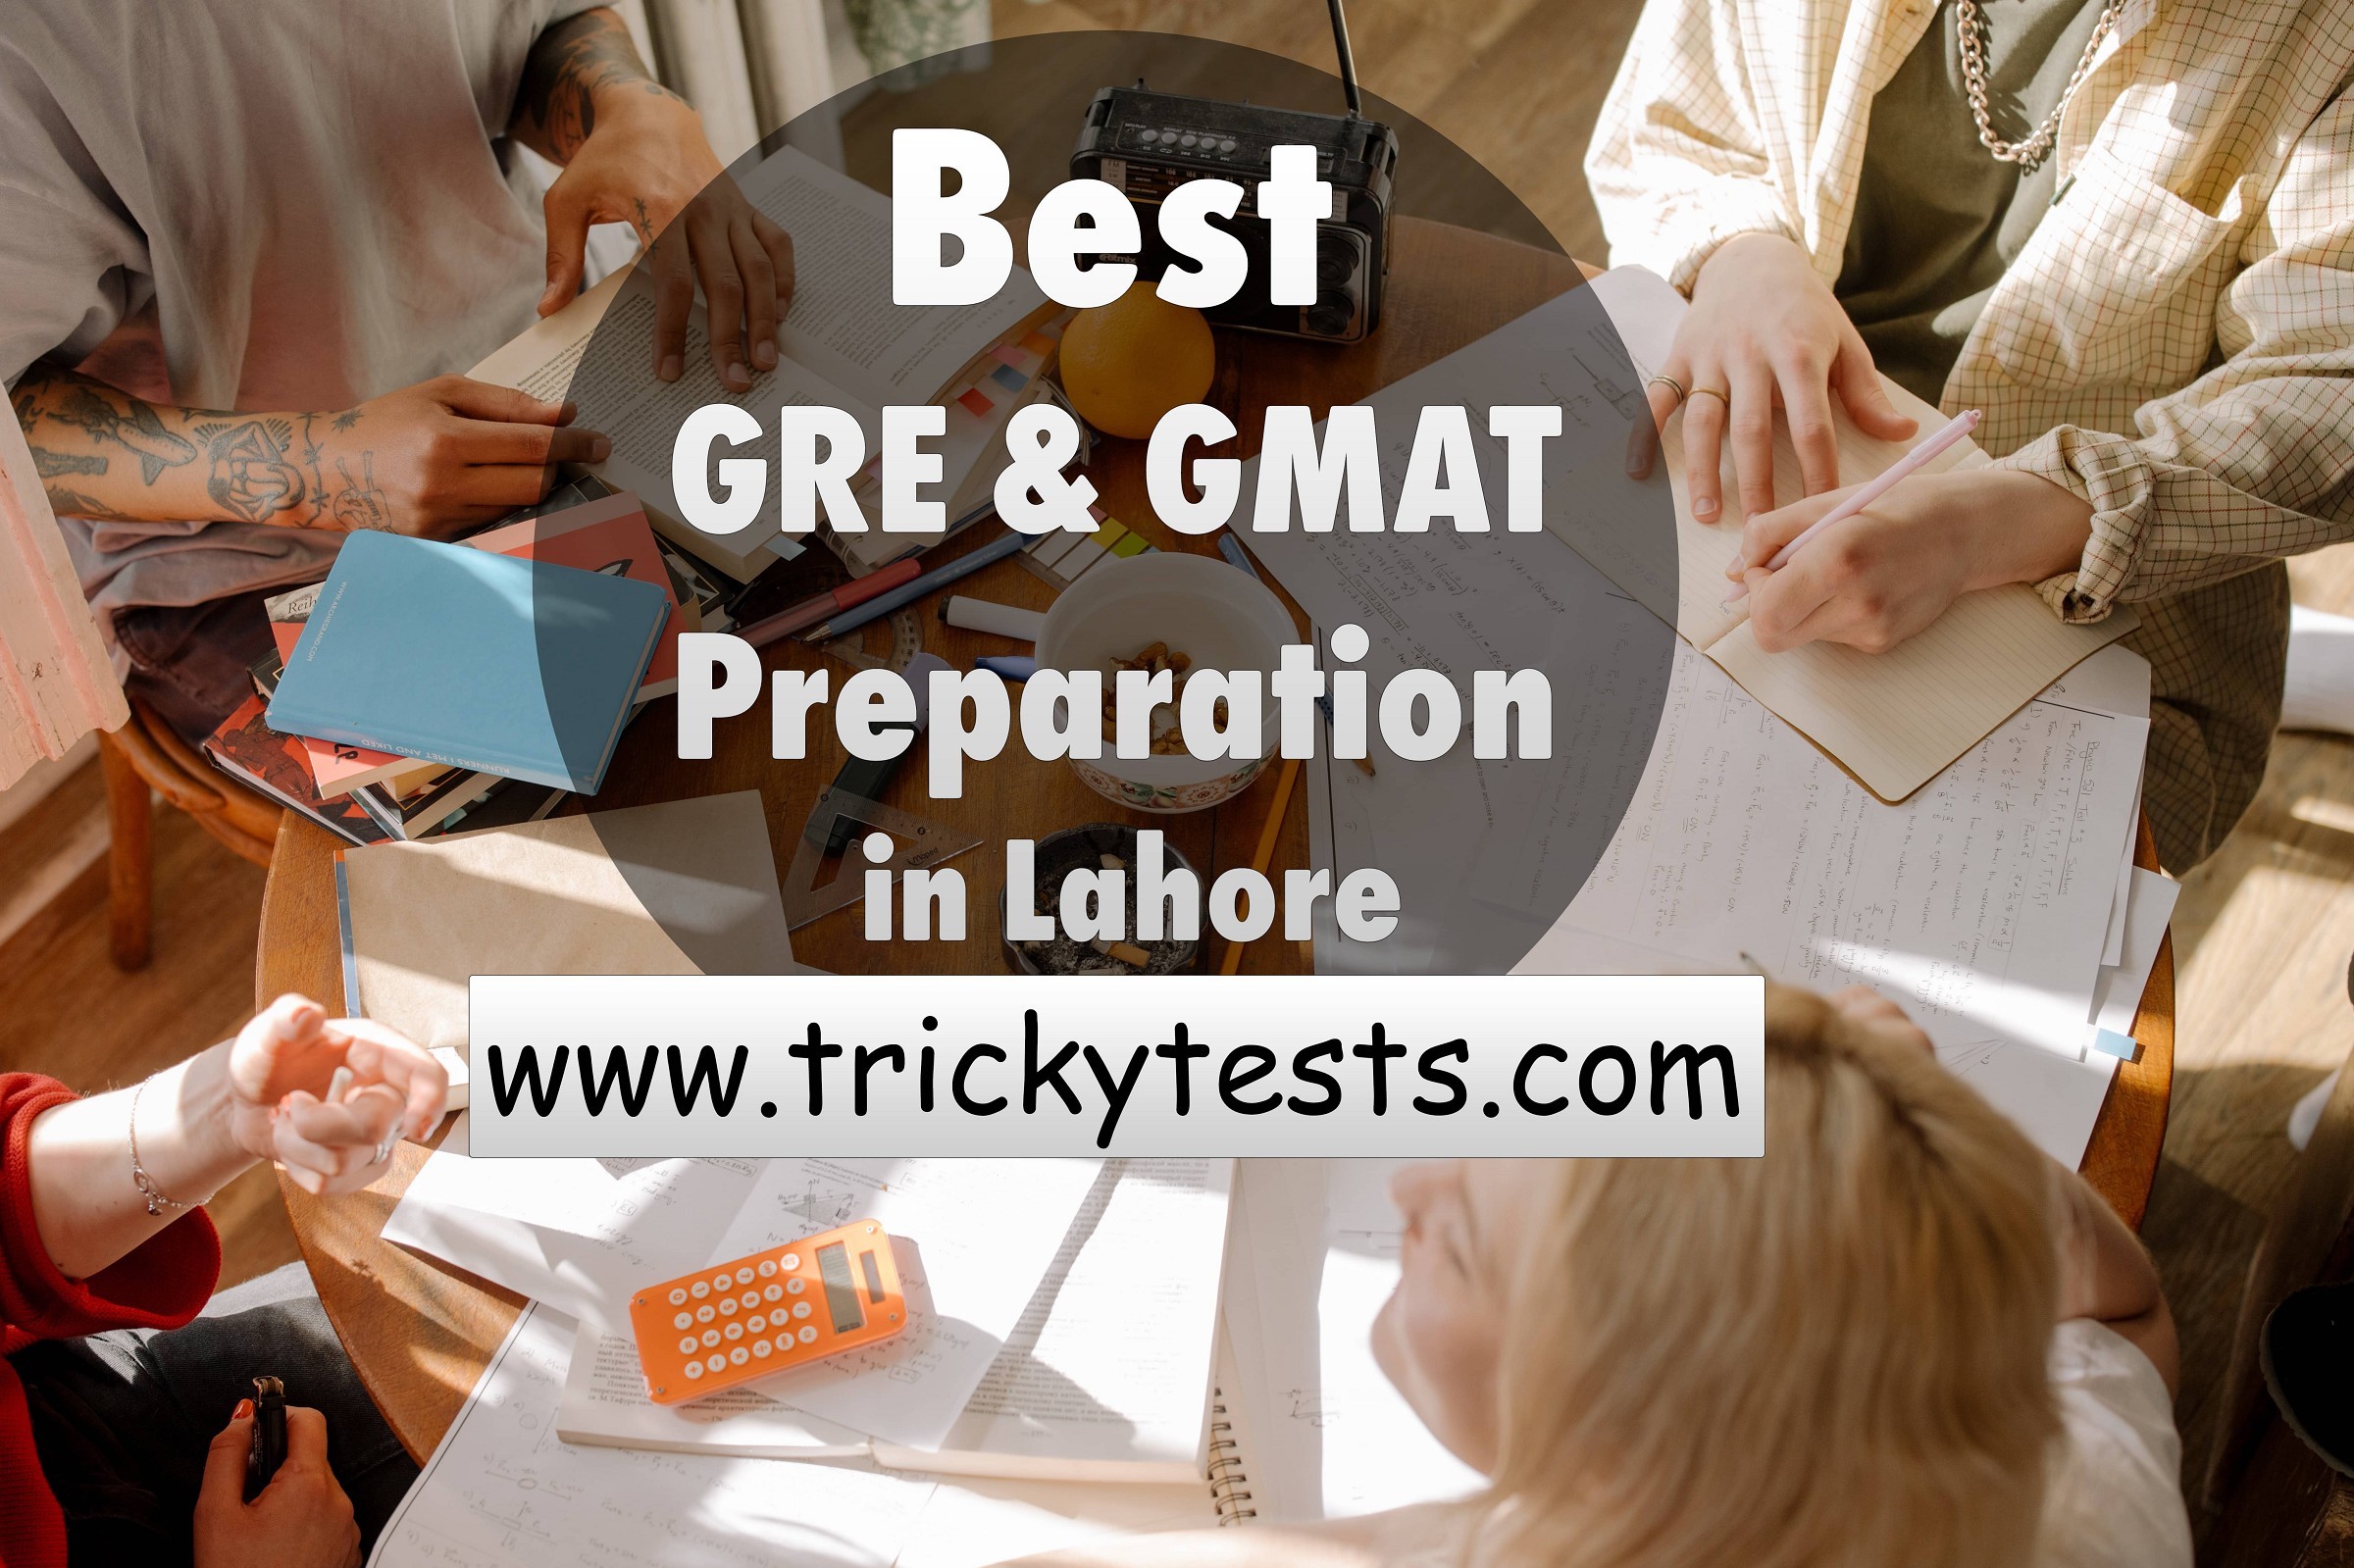 FREE tests for GRE and GMAT preparation